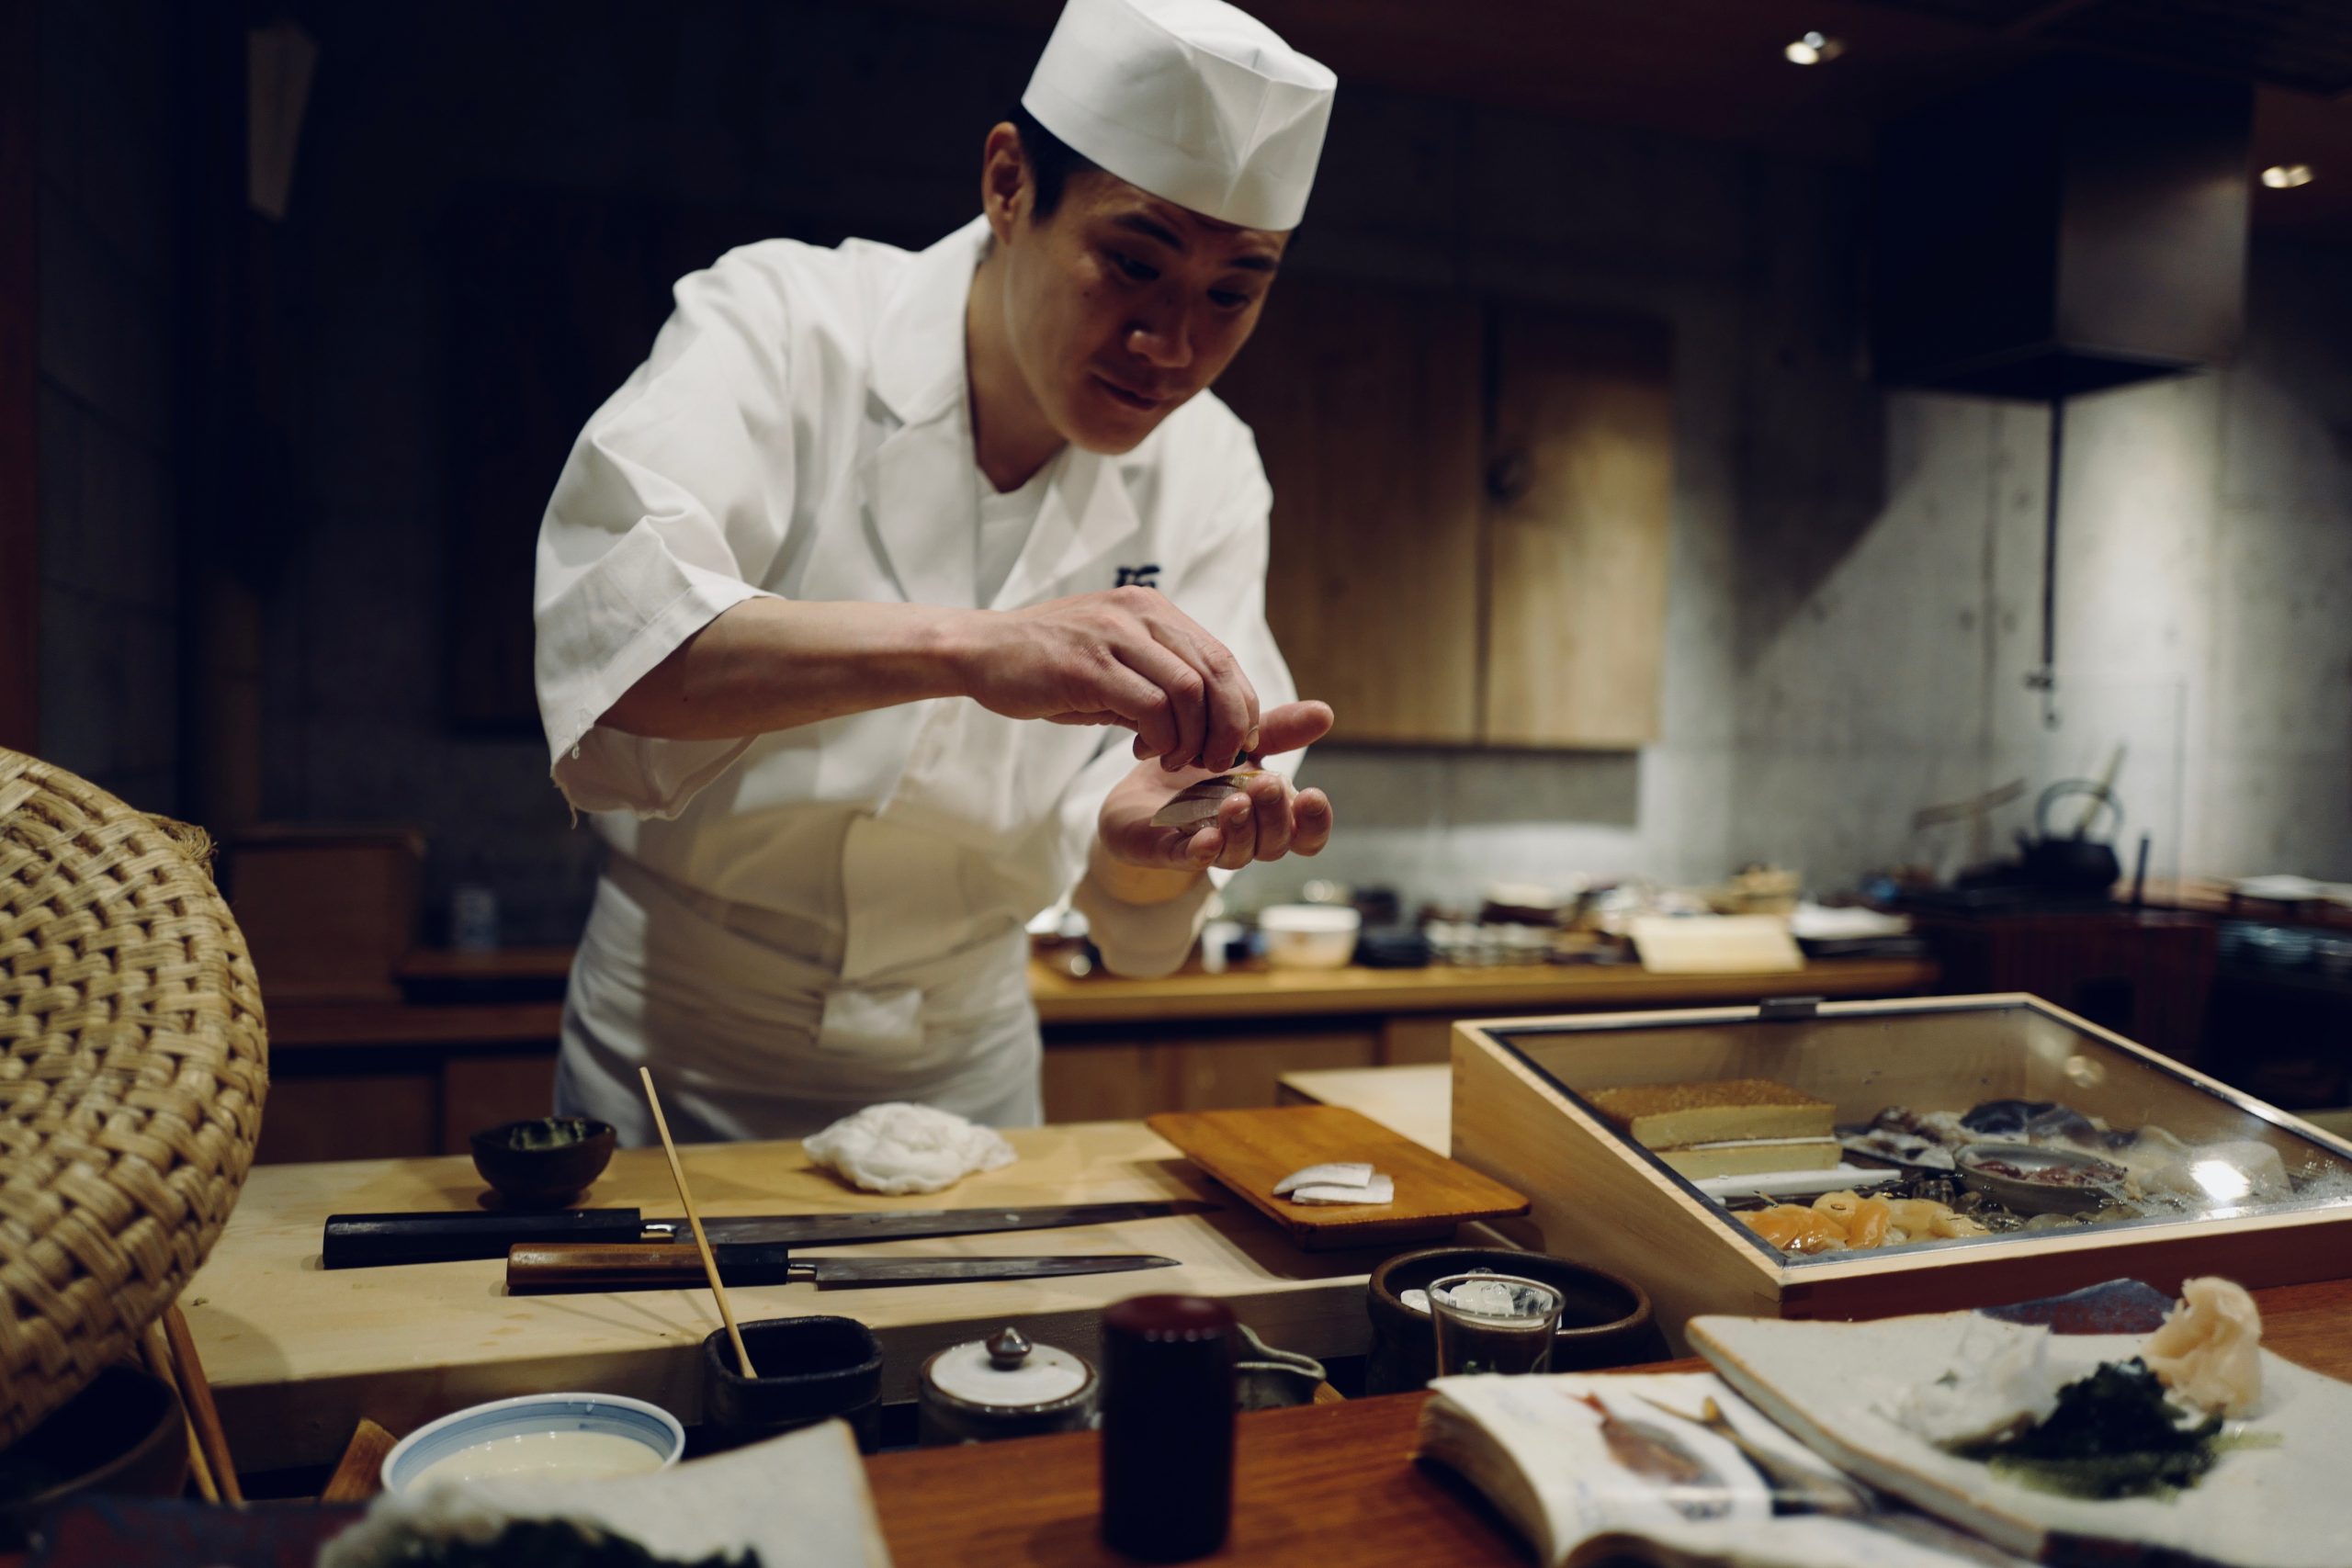 Japanese chef arranging his food to perfection